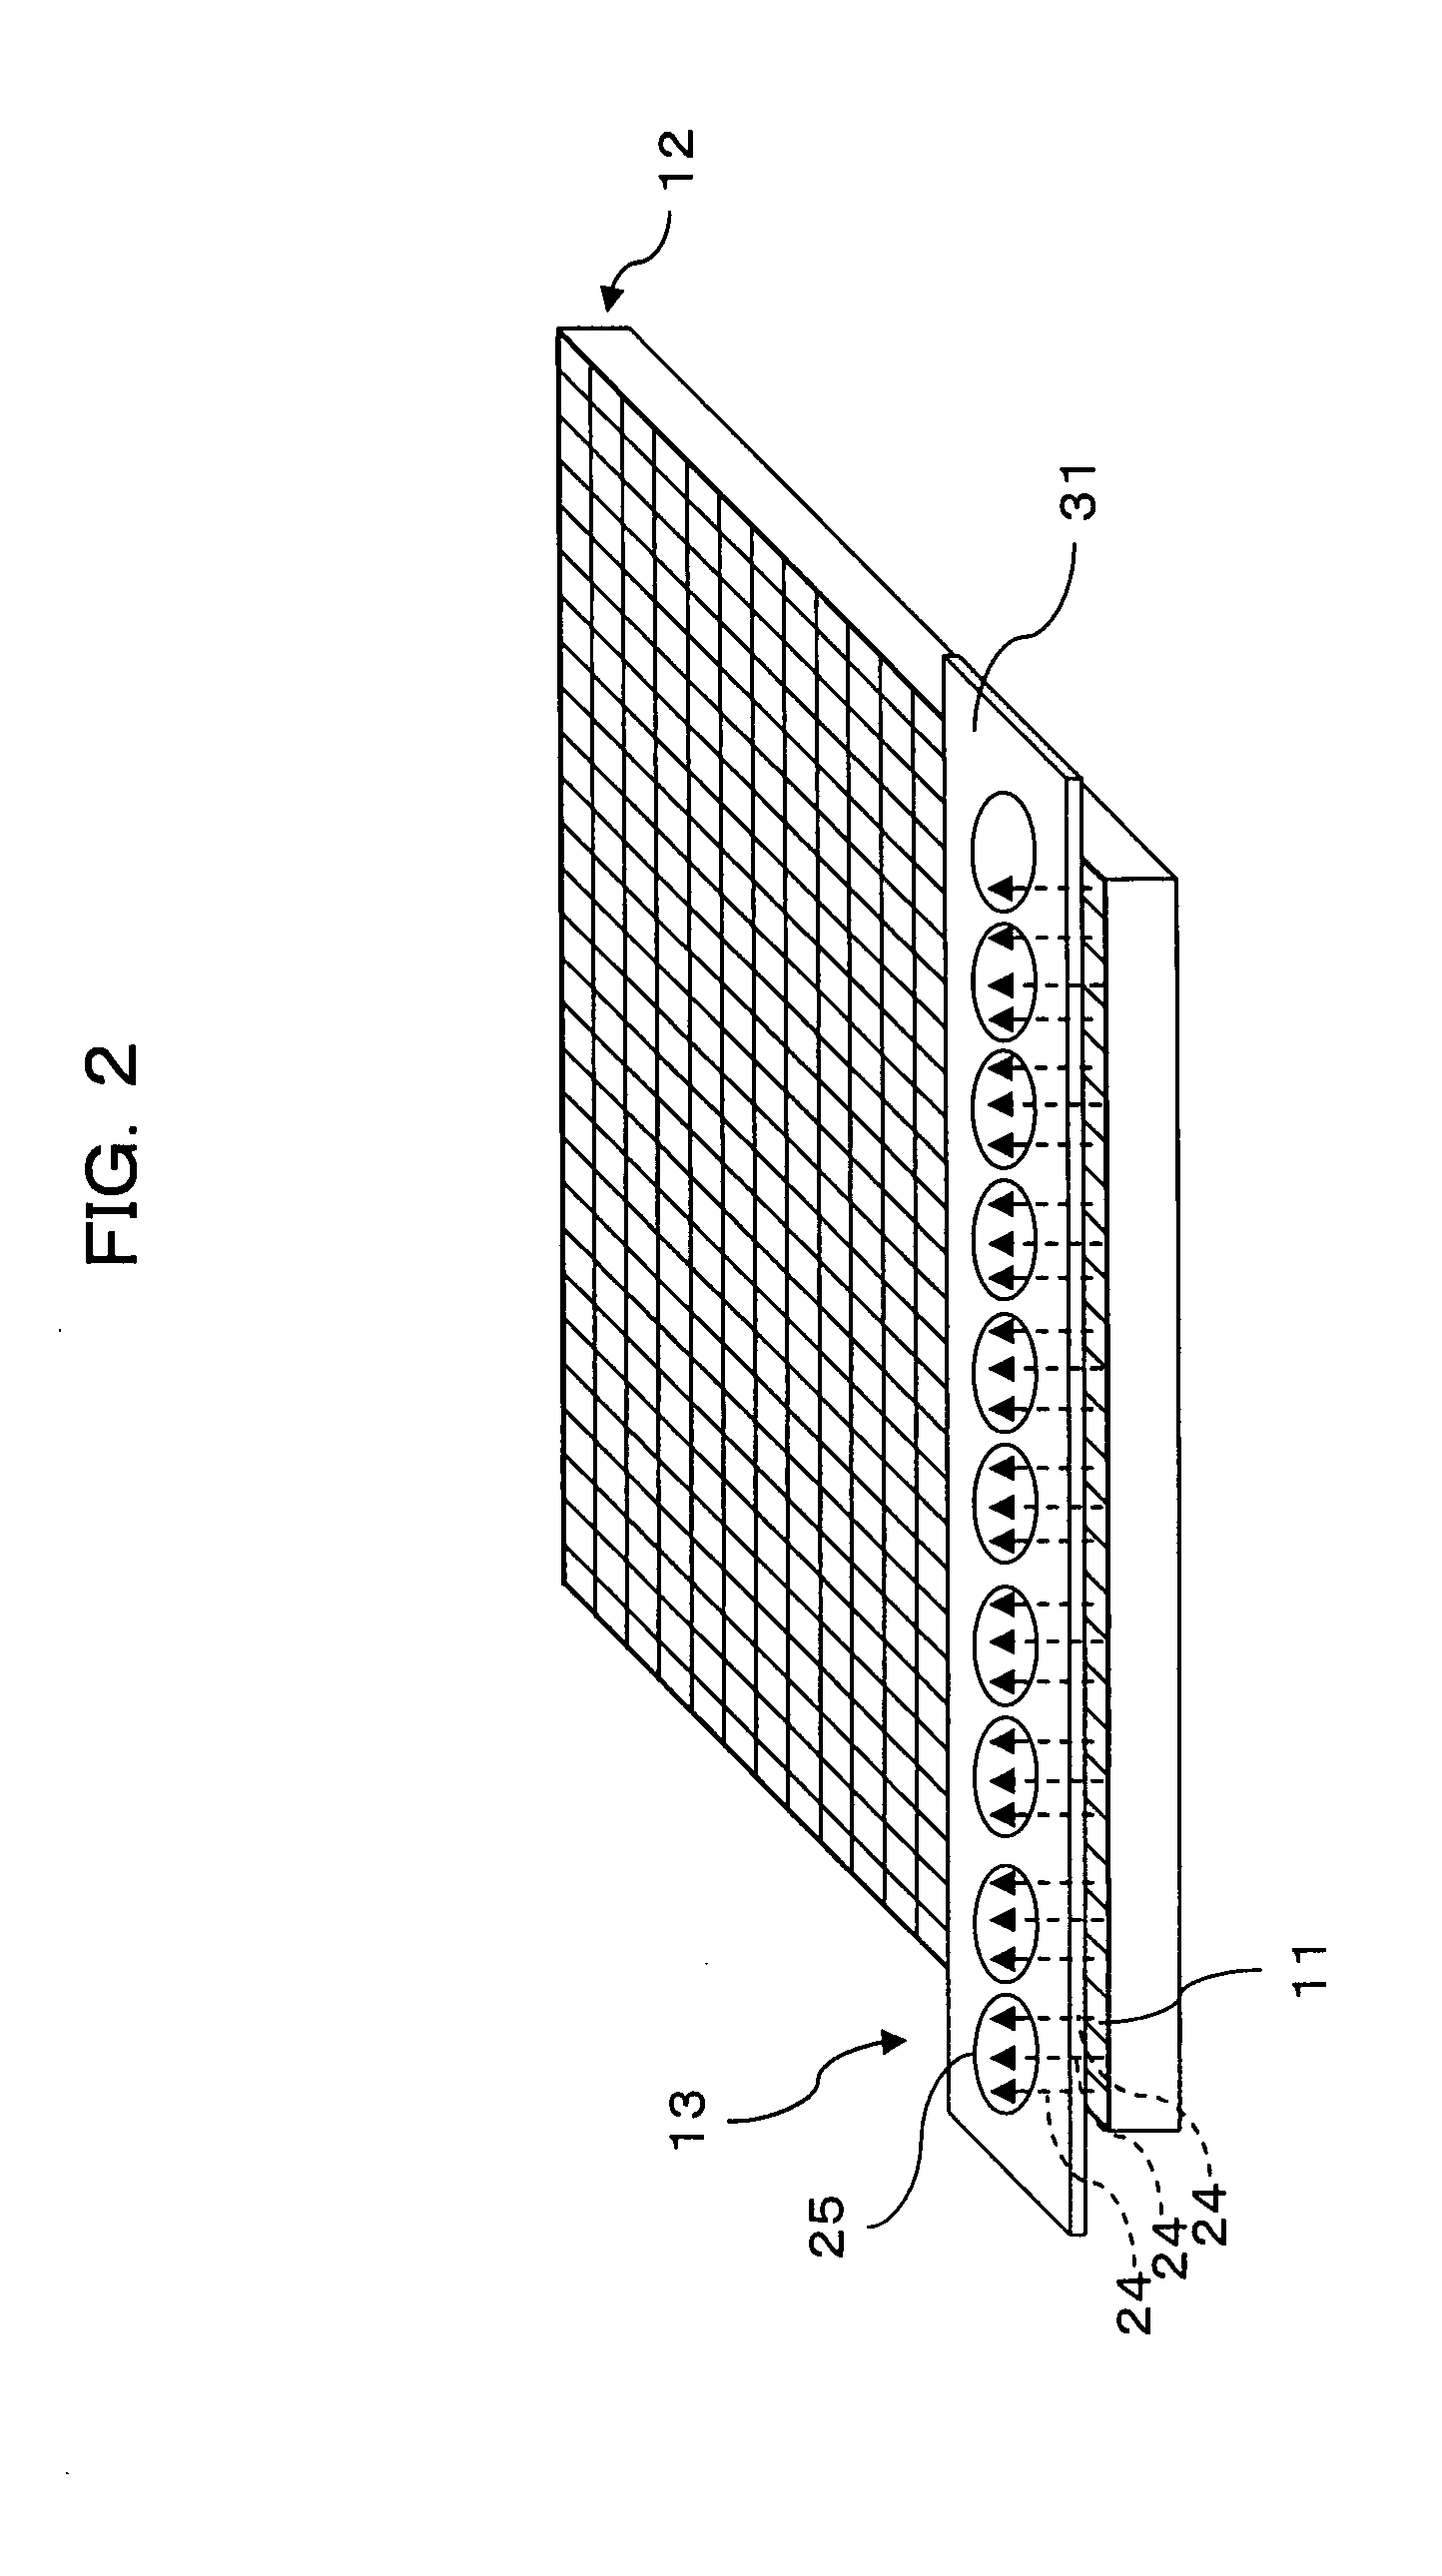 Display panel inspection apparatus and method